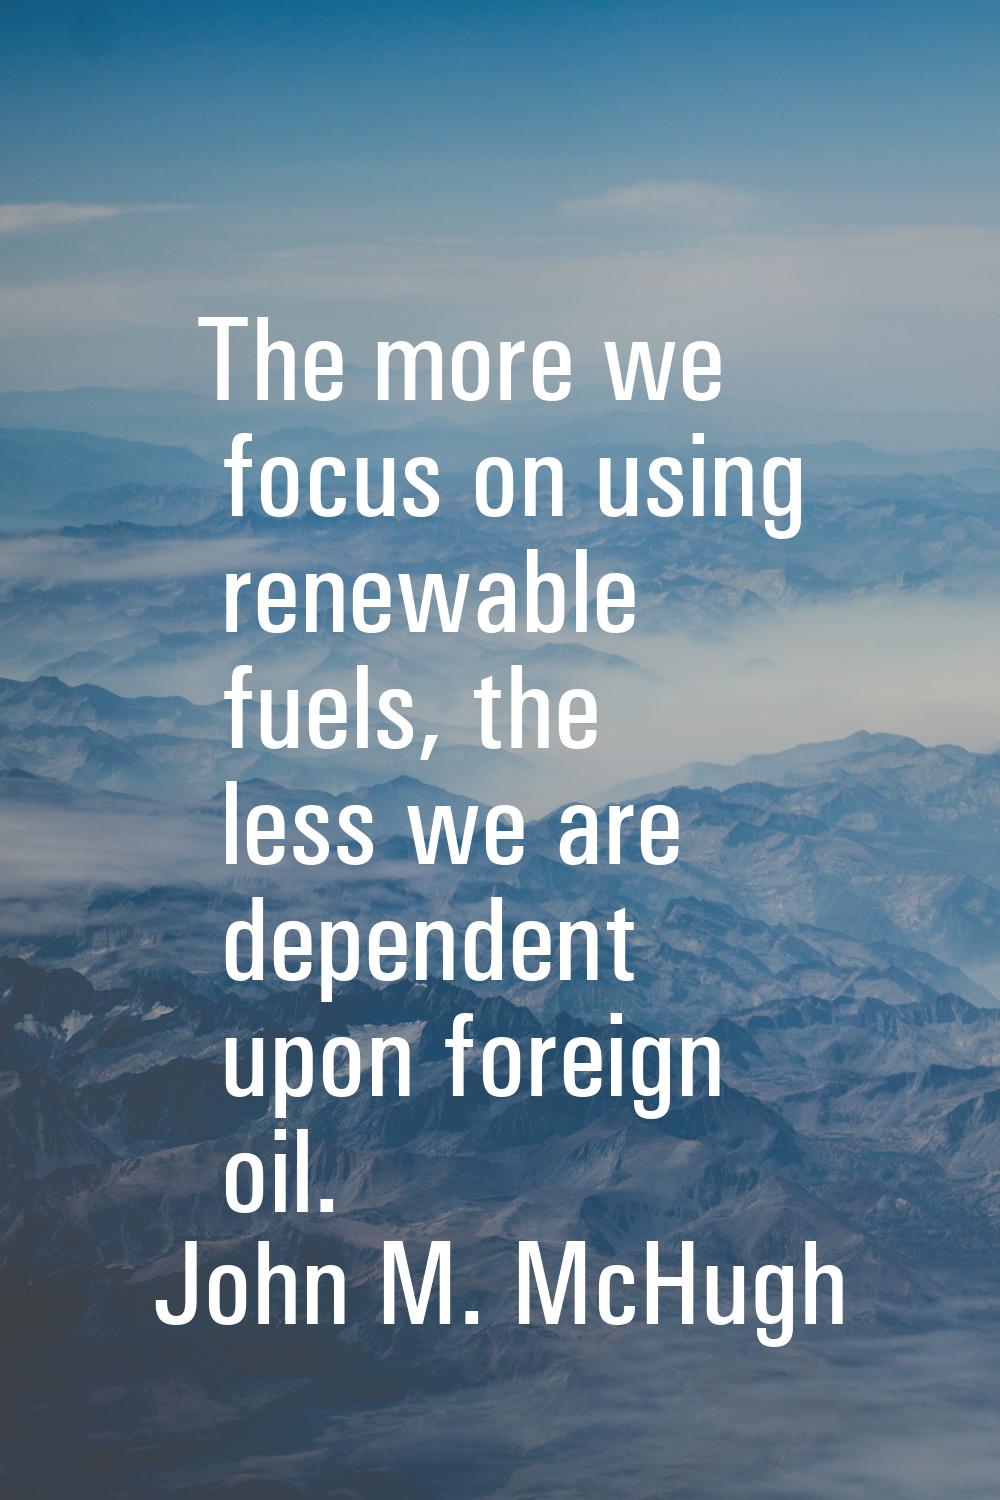 The more we focus on using renewable fuels, the less we are dependent upon foreign oil.